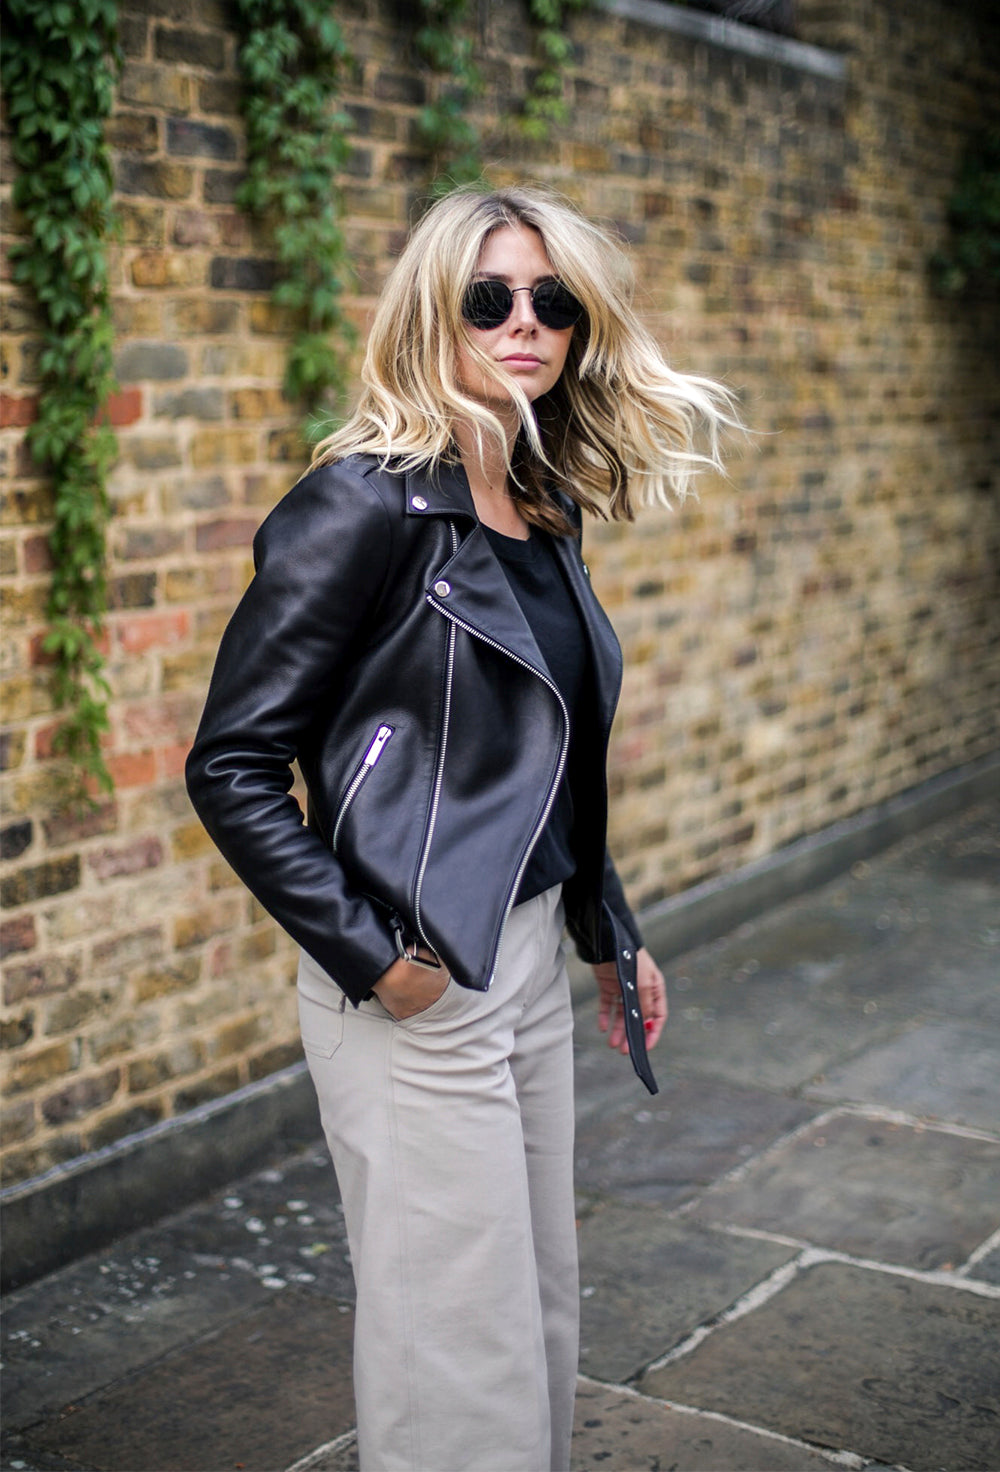 Leather Essentials For A Minimalistic Wardrobe and Endless Outfits